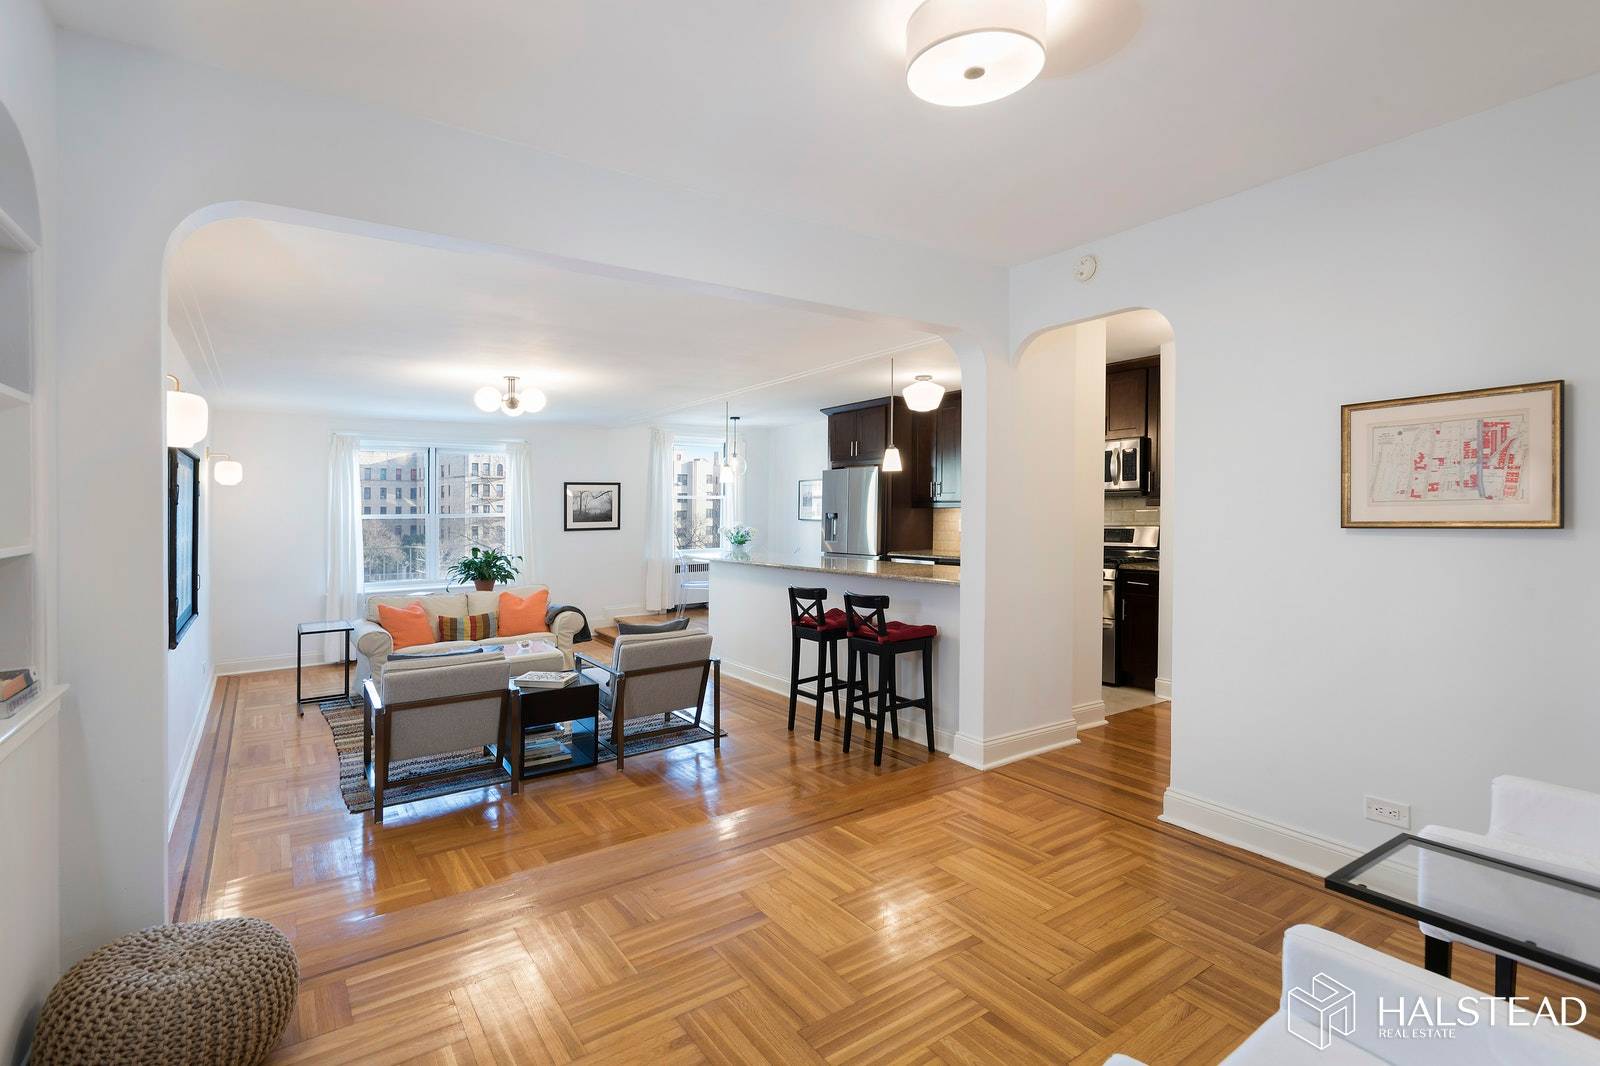 Welcome to this gracious 2 bedroom, 1 bathroom co op home in Hudson Heights with an abundance of light.